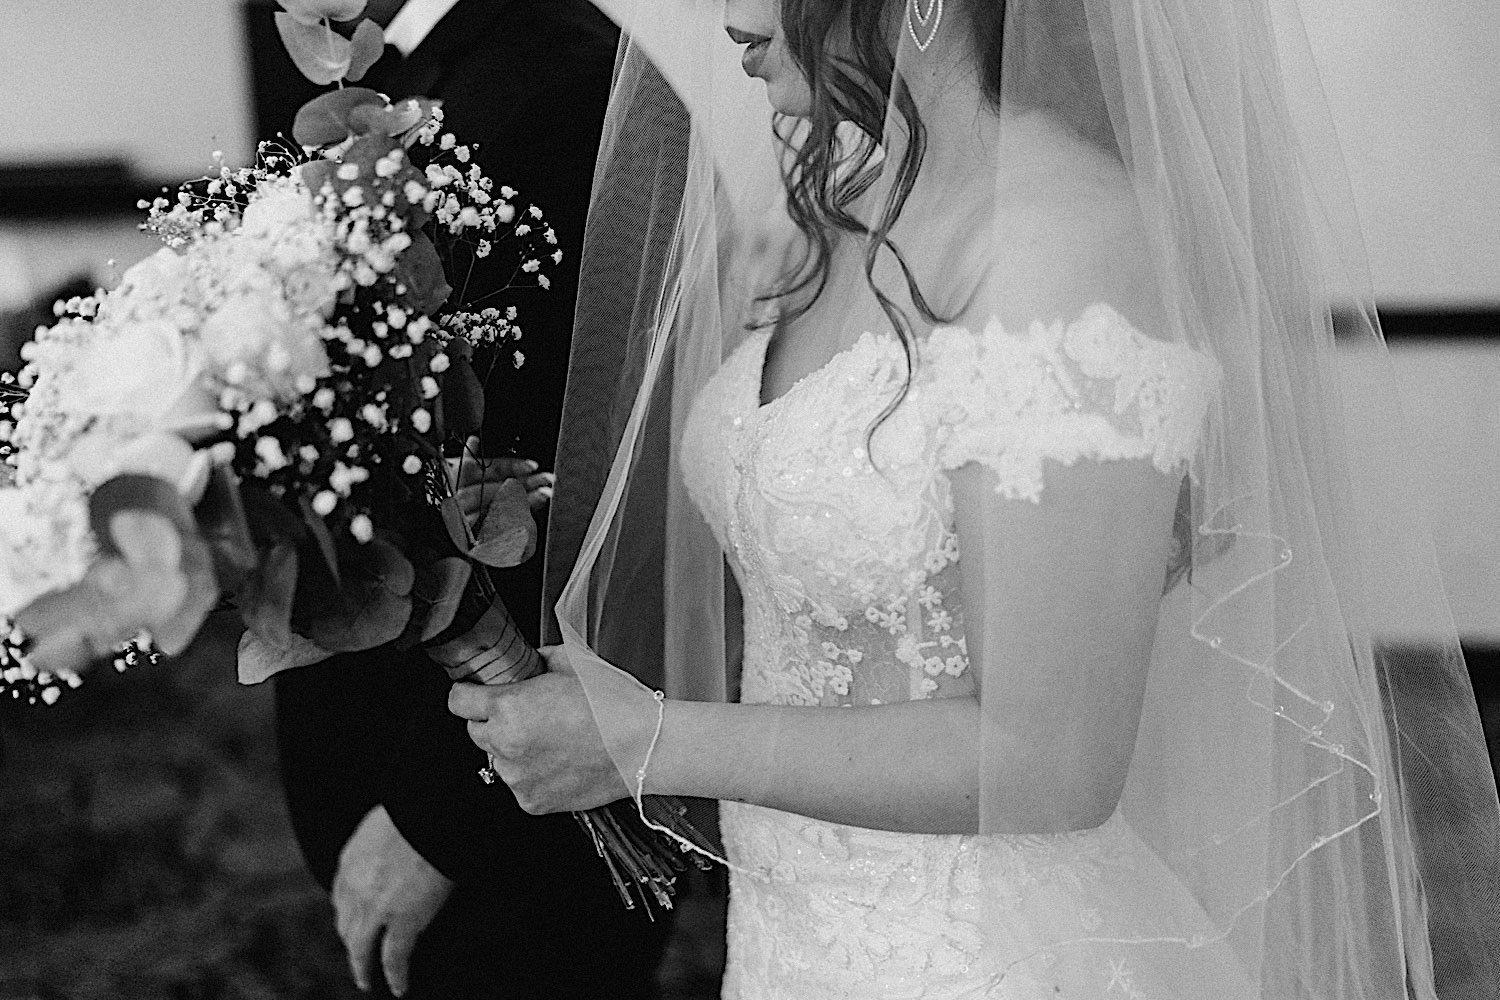 Black and white photo of a bride carrying a bouquet of flowers while being escorted down the aisle